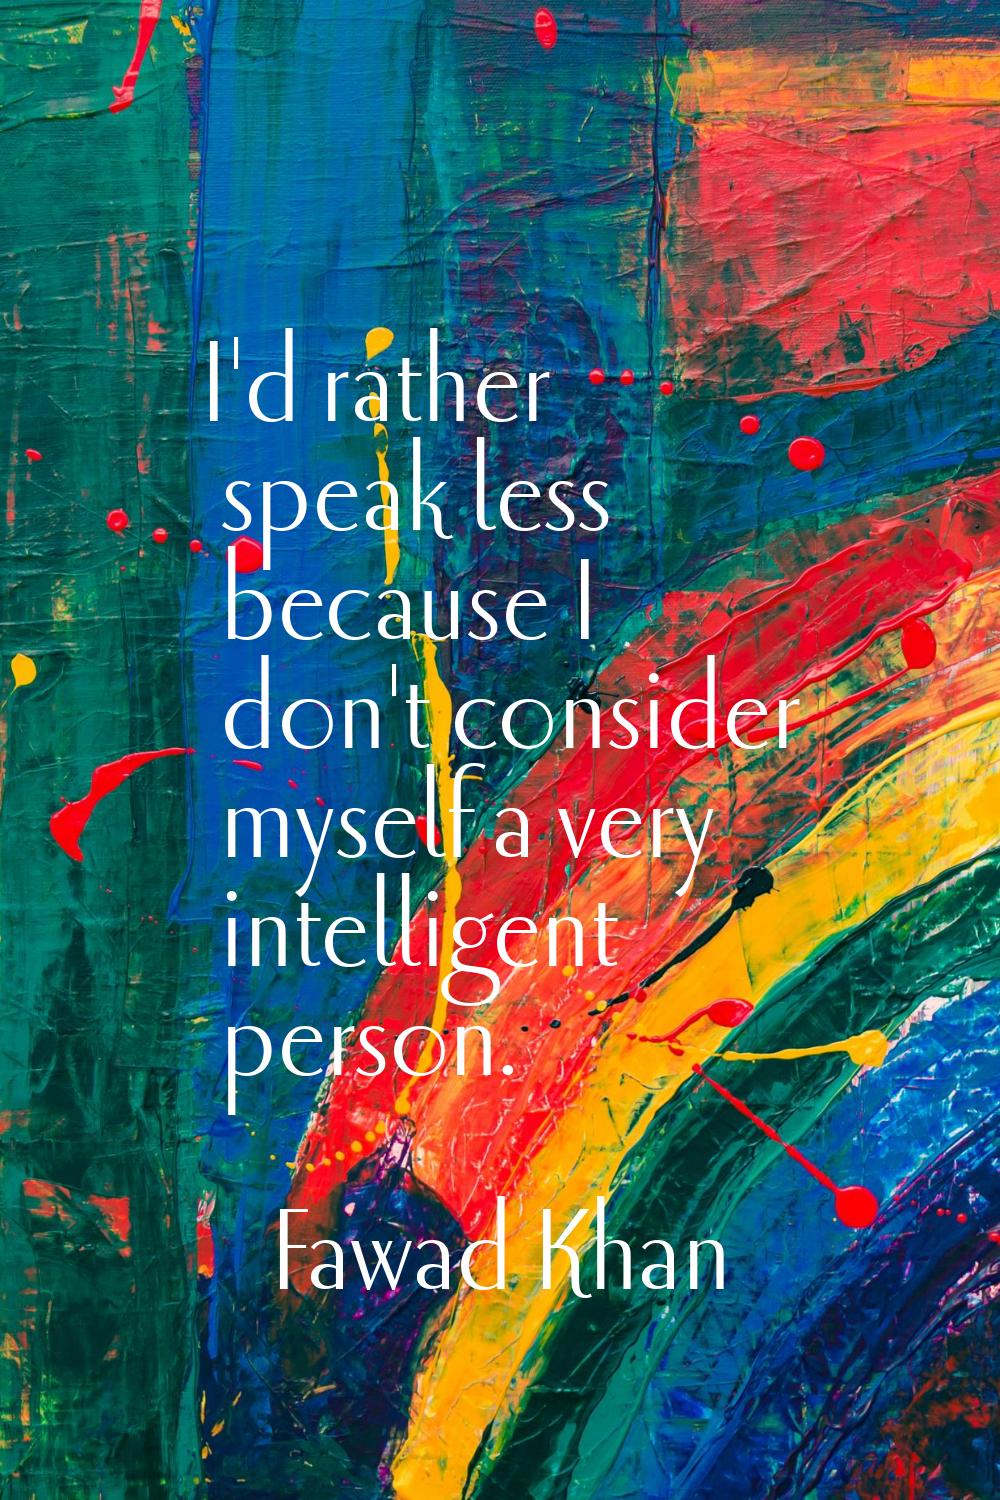 I'd rather speak less because I don't consider myself a very intelligent person.